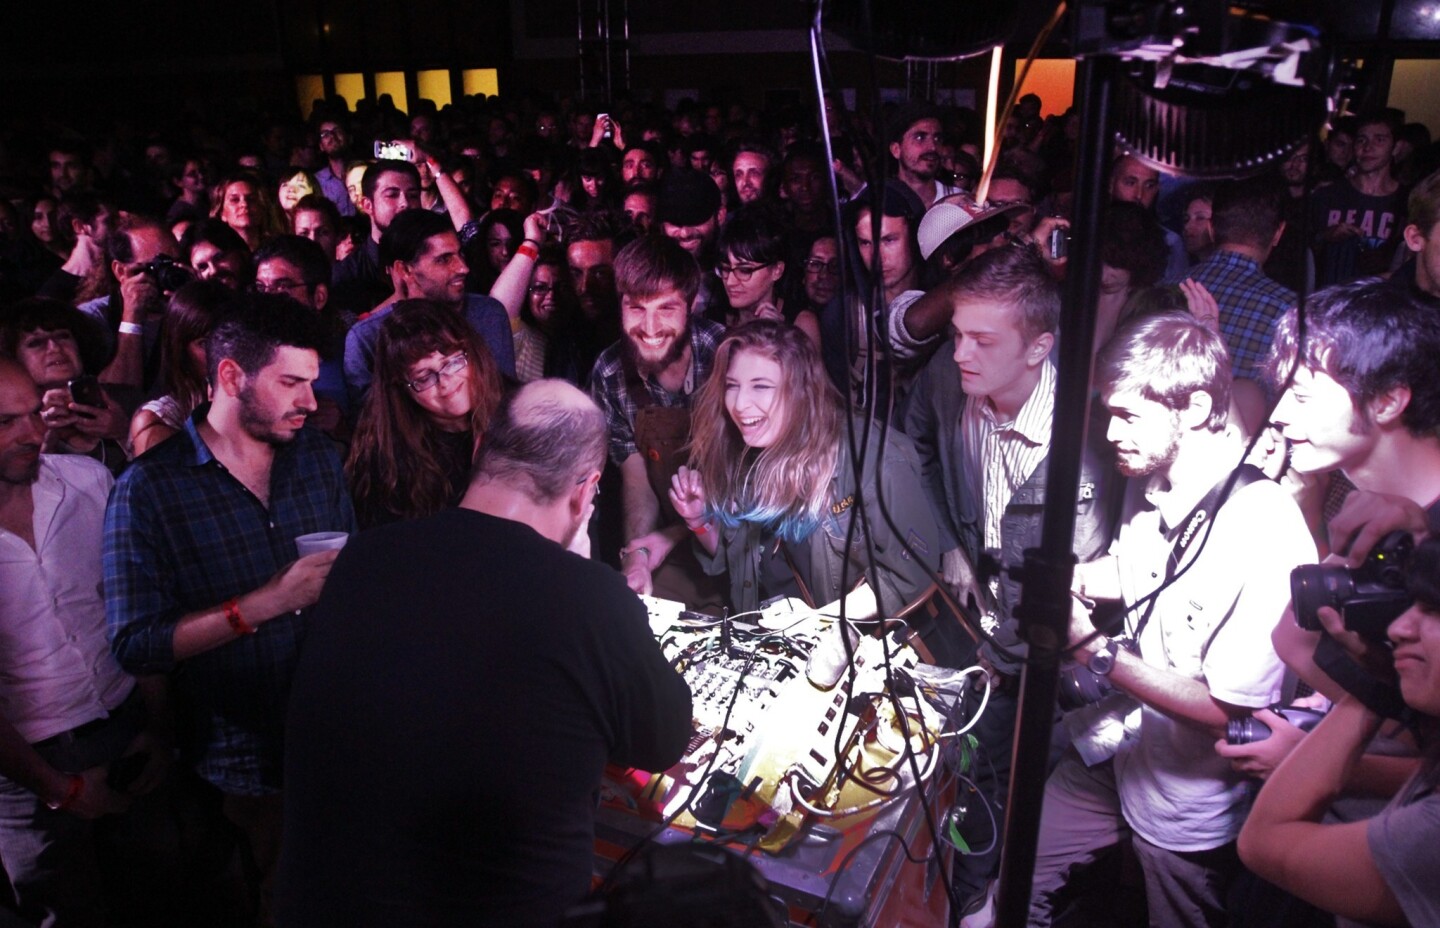 In 2013, The Times documented part of the "Station to Station" art show. Here, DJ Dan Deacon performs at the "Station to Station" downtown L.A. event.